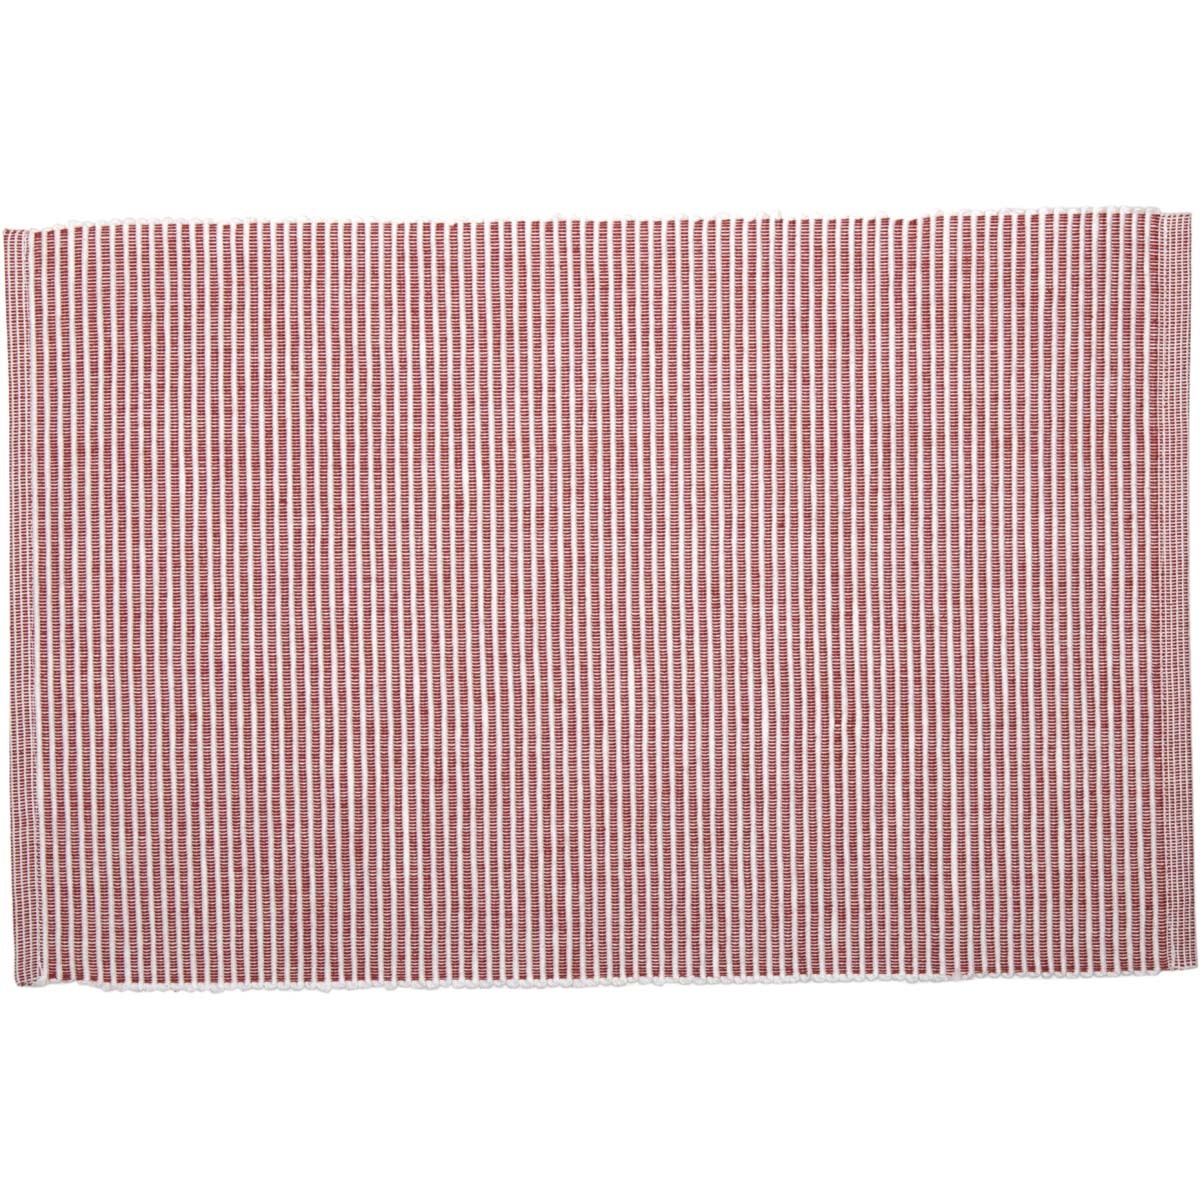 Ashton Rust Ribbed Placemat Set of 6 12x18 VHC Brands